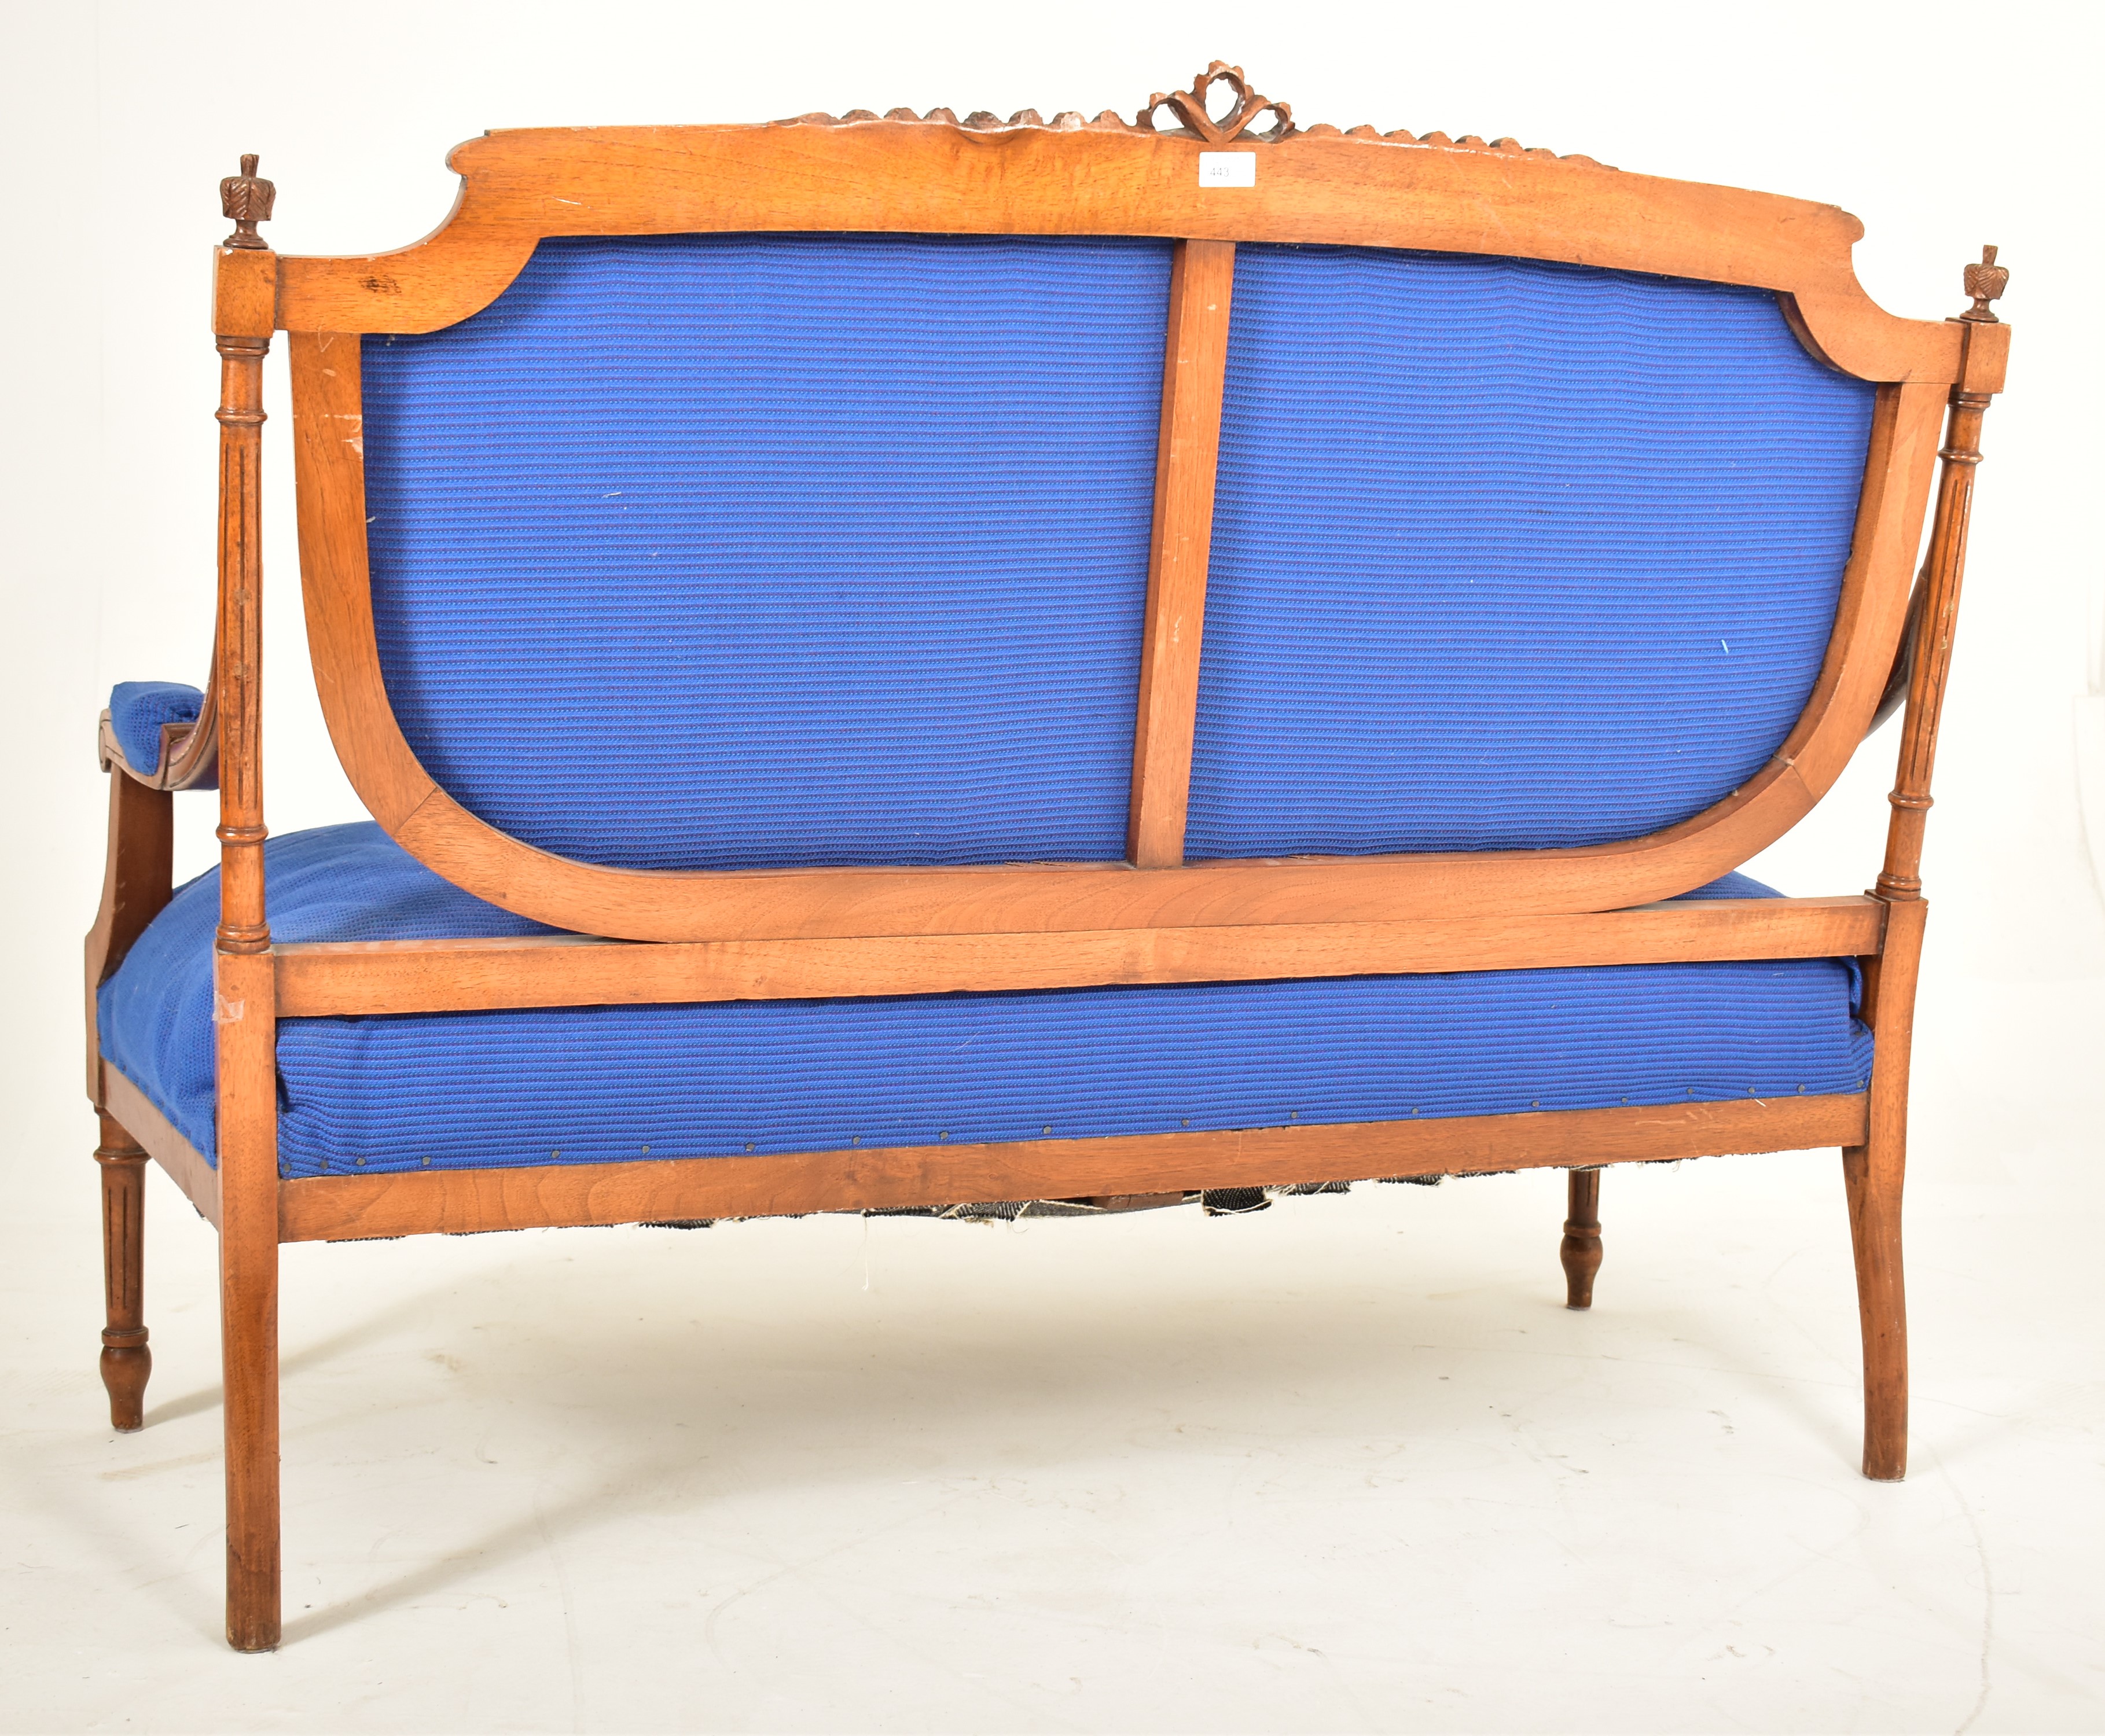 FRENCH LOUIS XVI STYLE CARVED OAK & UPHOLSTERED CANAPE SOFA - Image 7 of 7